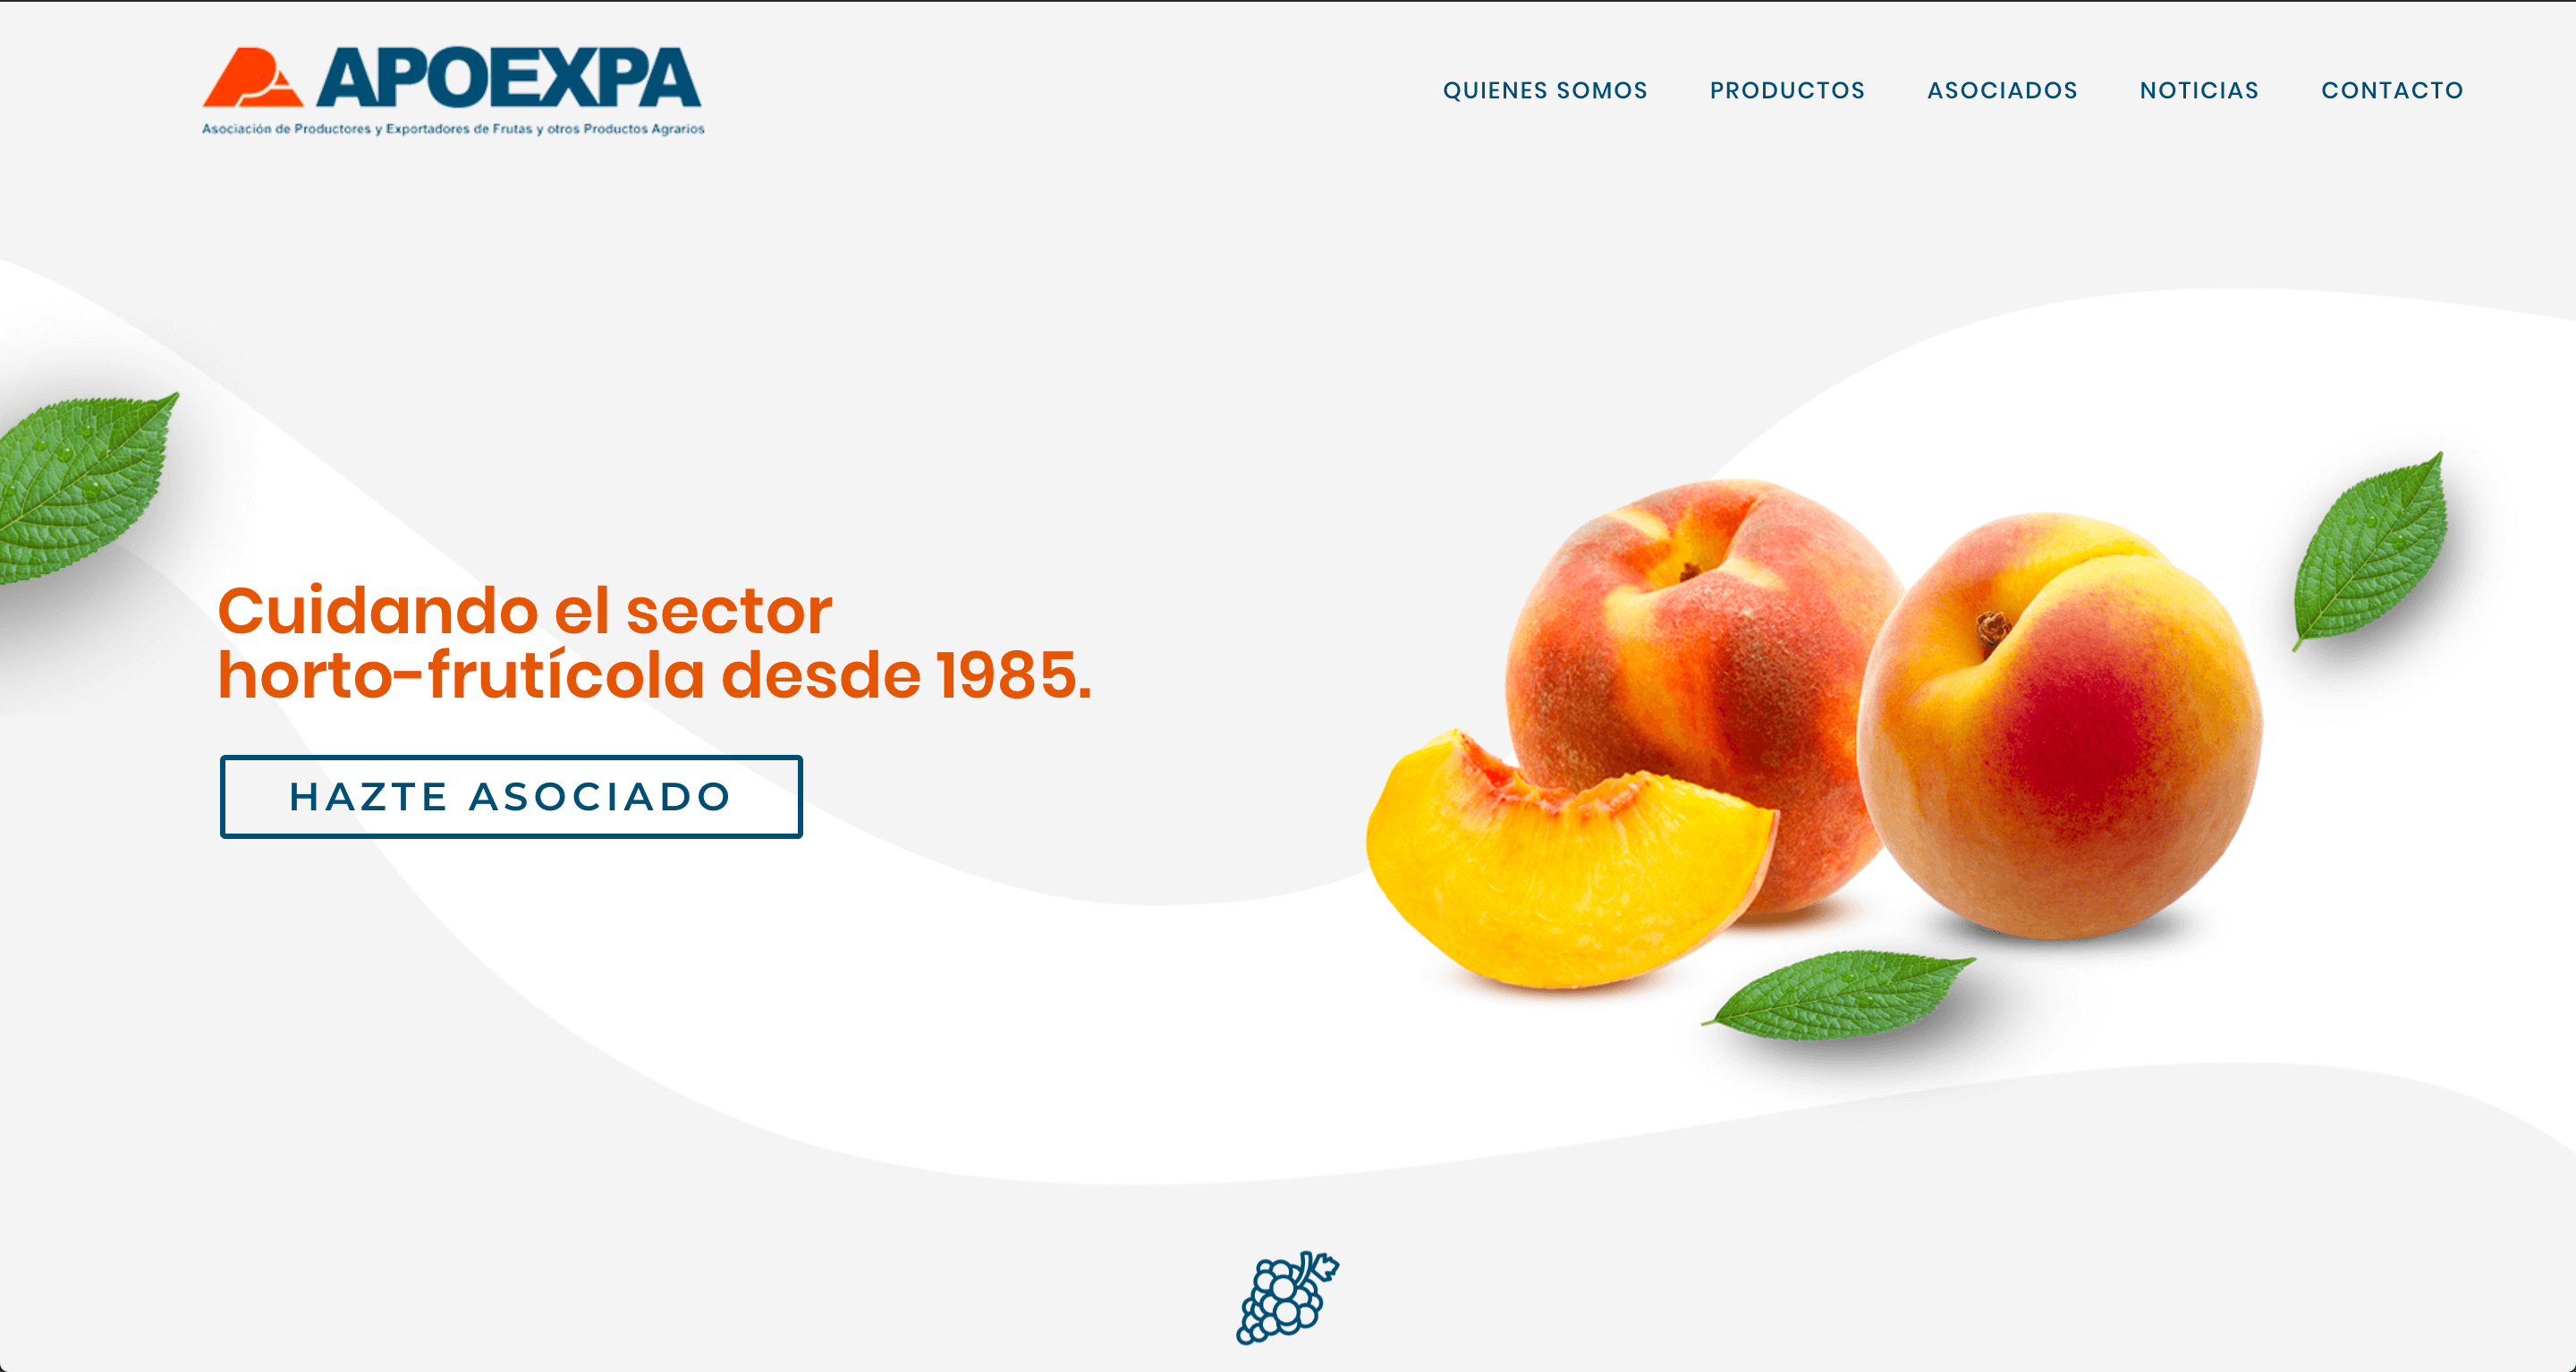 Apoexpa launches a new website